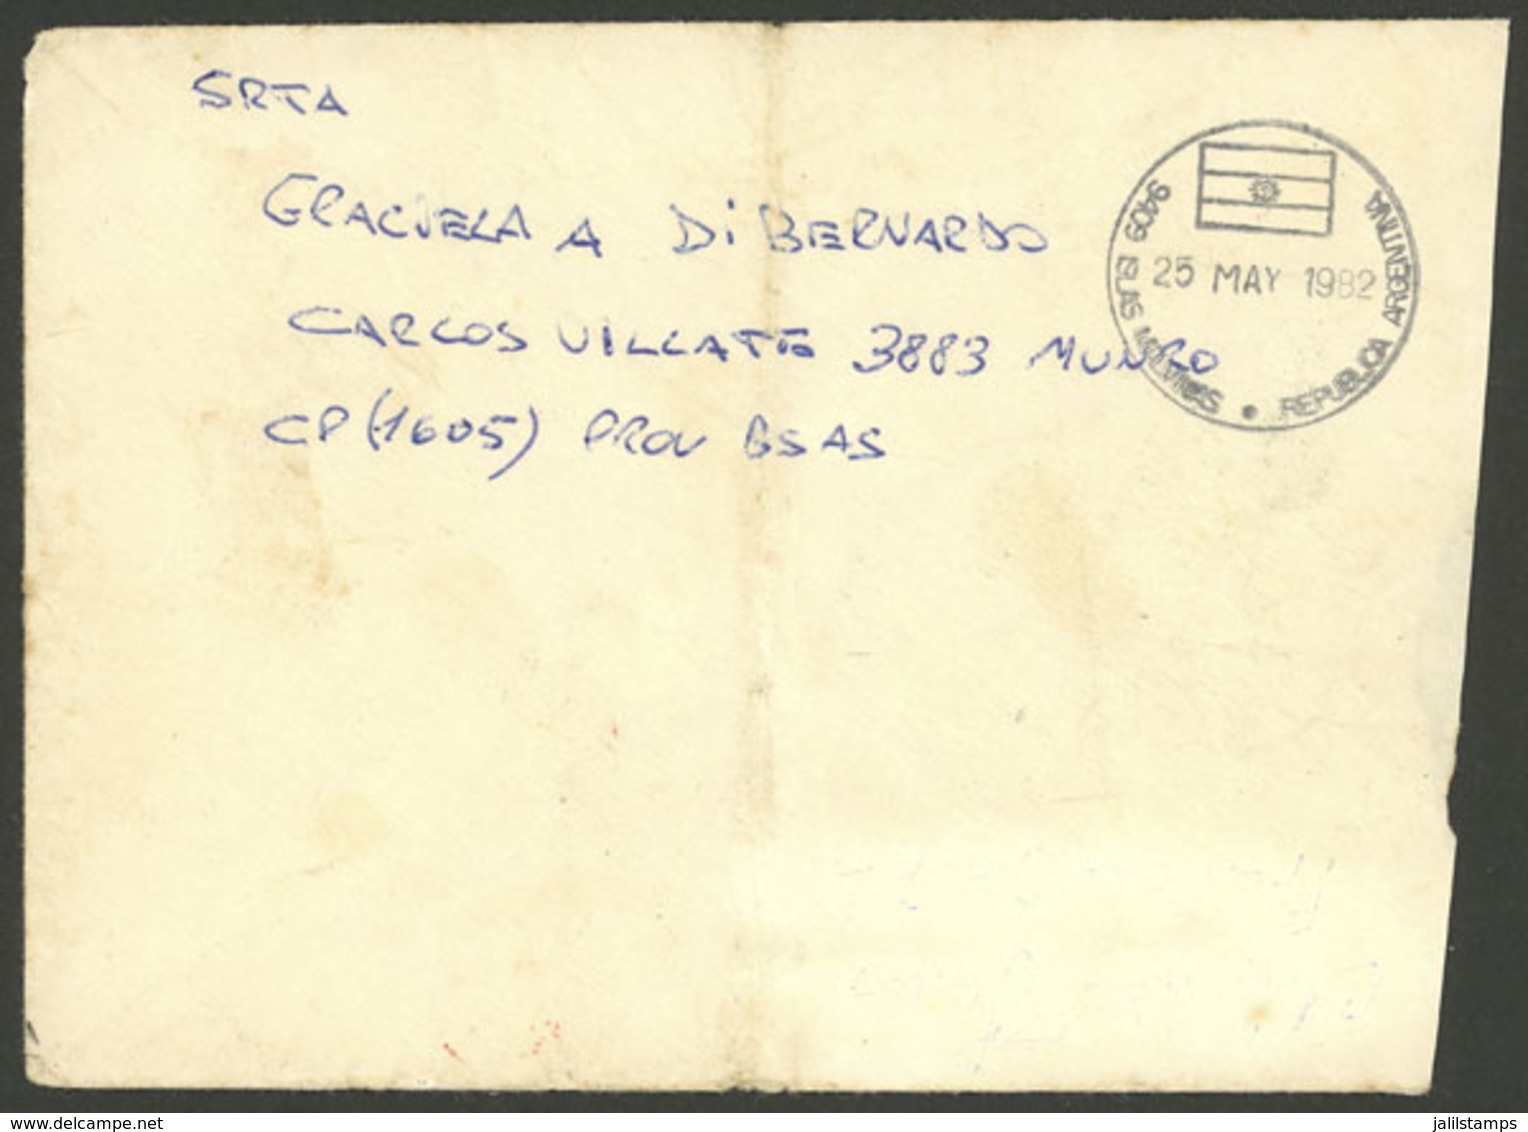 FALKLAND ISLANDS/MALVINAS: FALKLANDS WAR: Cover Sent By An Argentine Soldier To His Mother In Buenos Aires, With Free Fr - Falkland